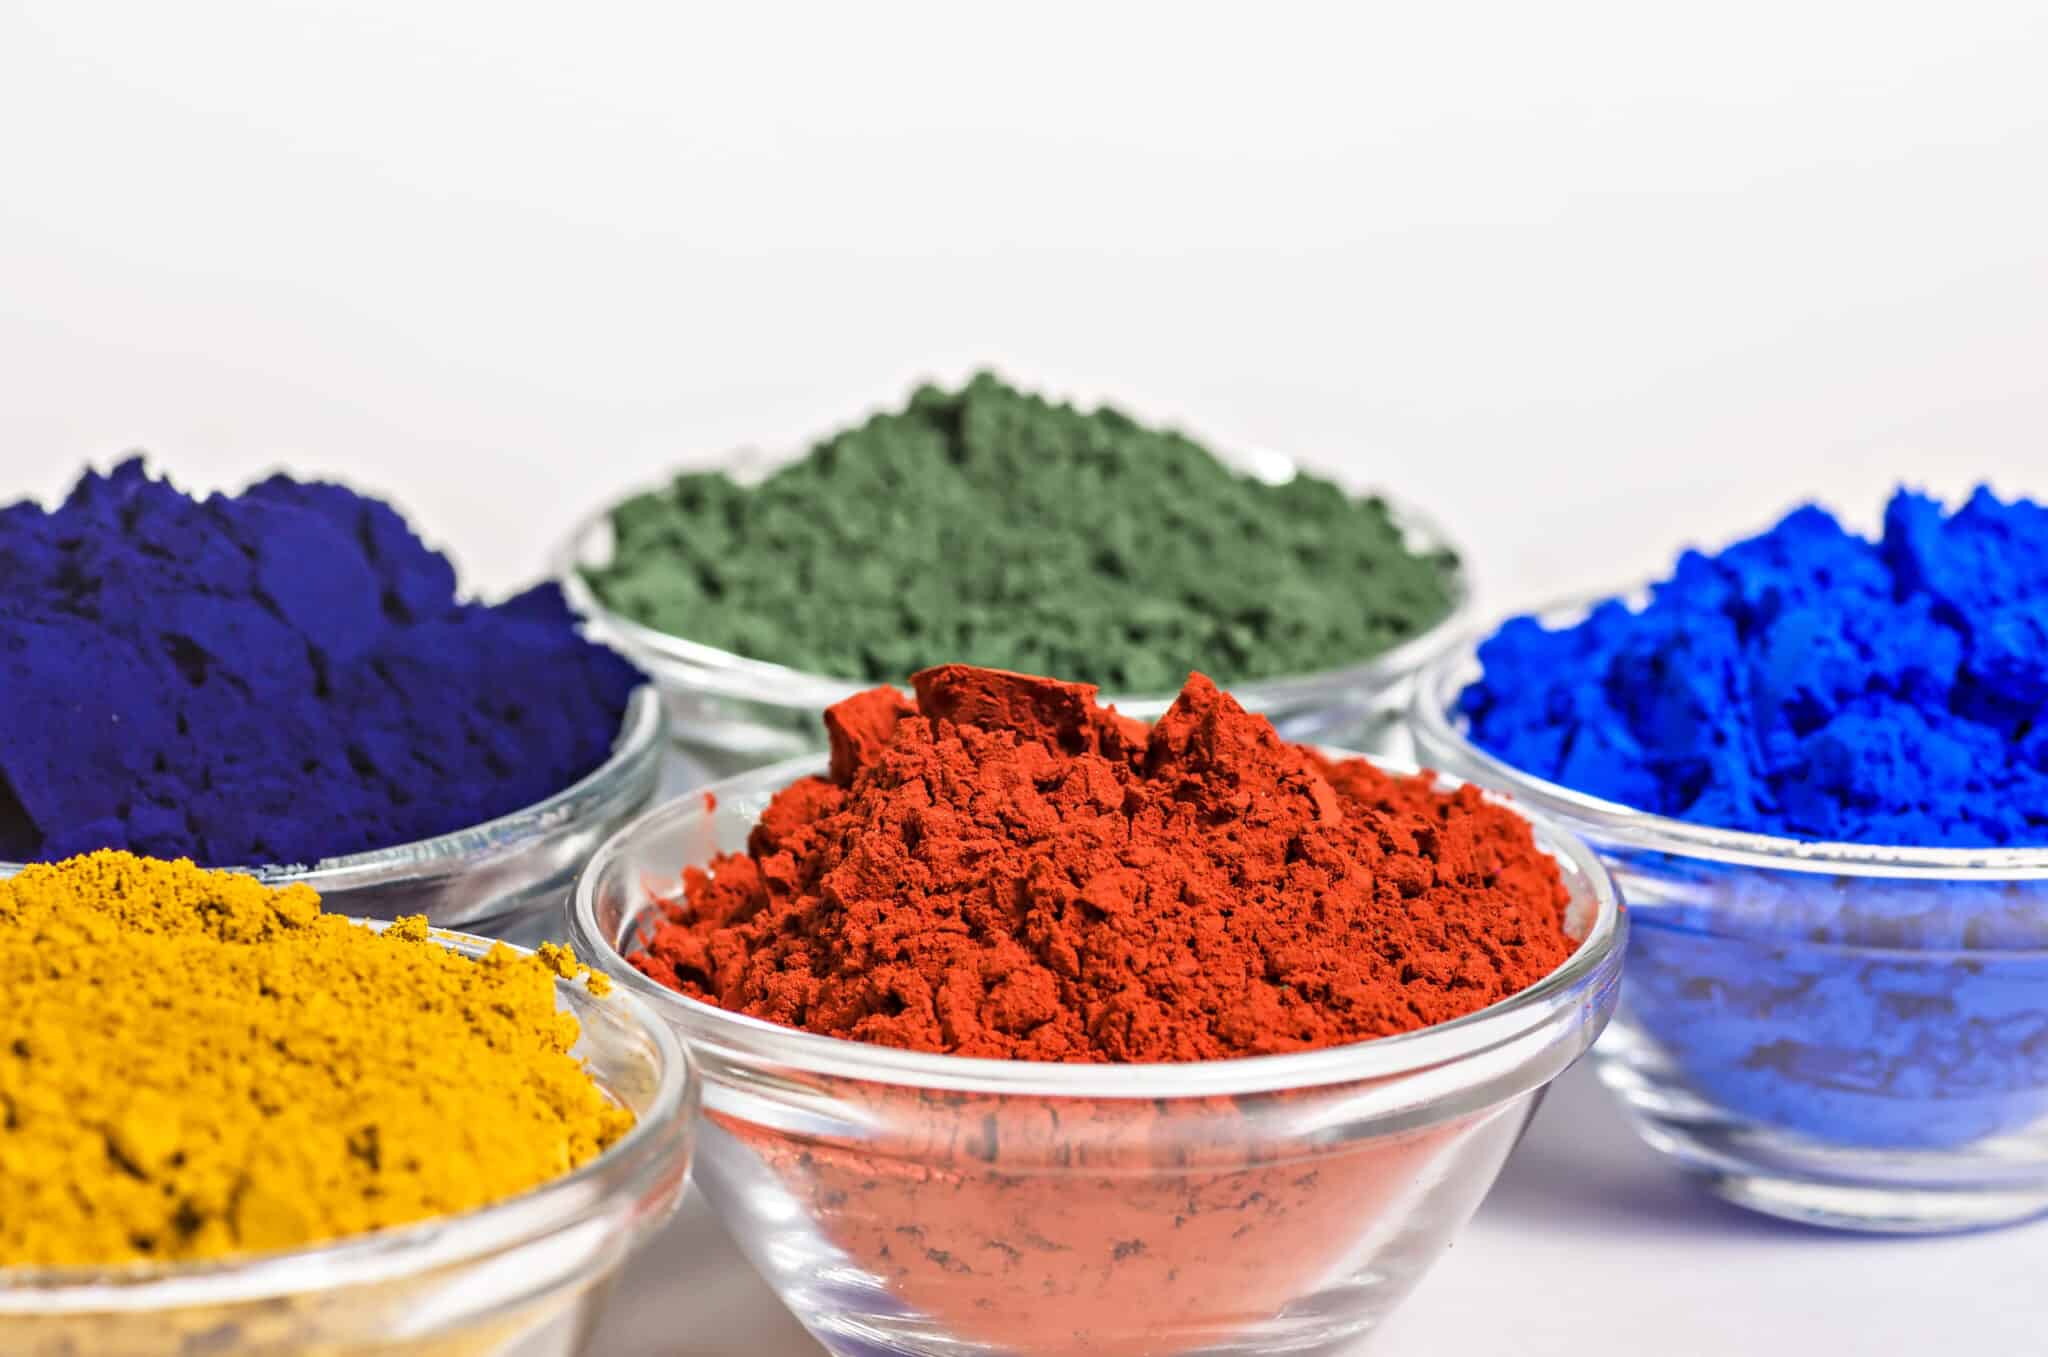 Kit Epoxy Resin Color Pigment Powder 18 Colors, Extra Fineness, Perfect  Blending, Including Solid Colors & Pearly Glitters